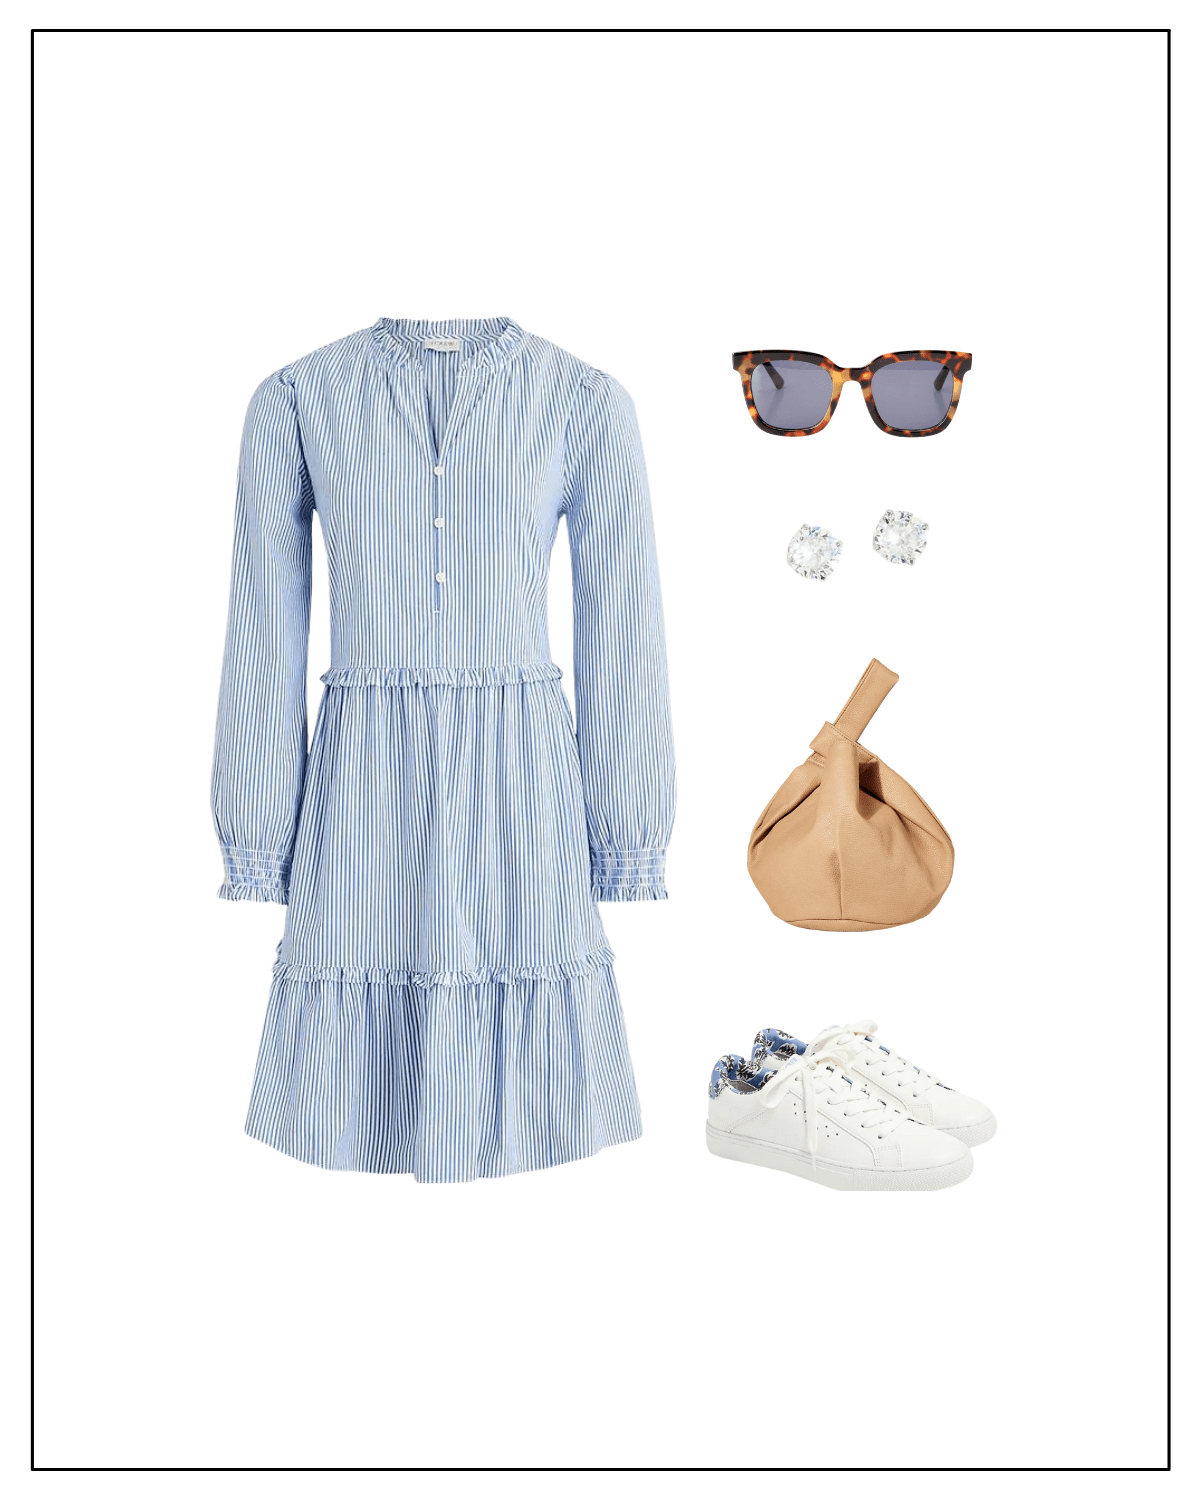 Striped Dress Spring Outfit Ideas Under $100